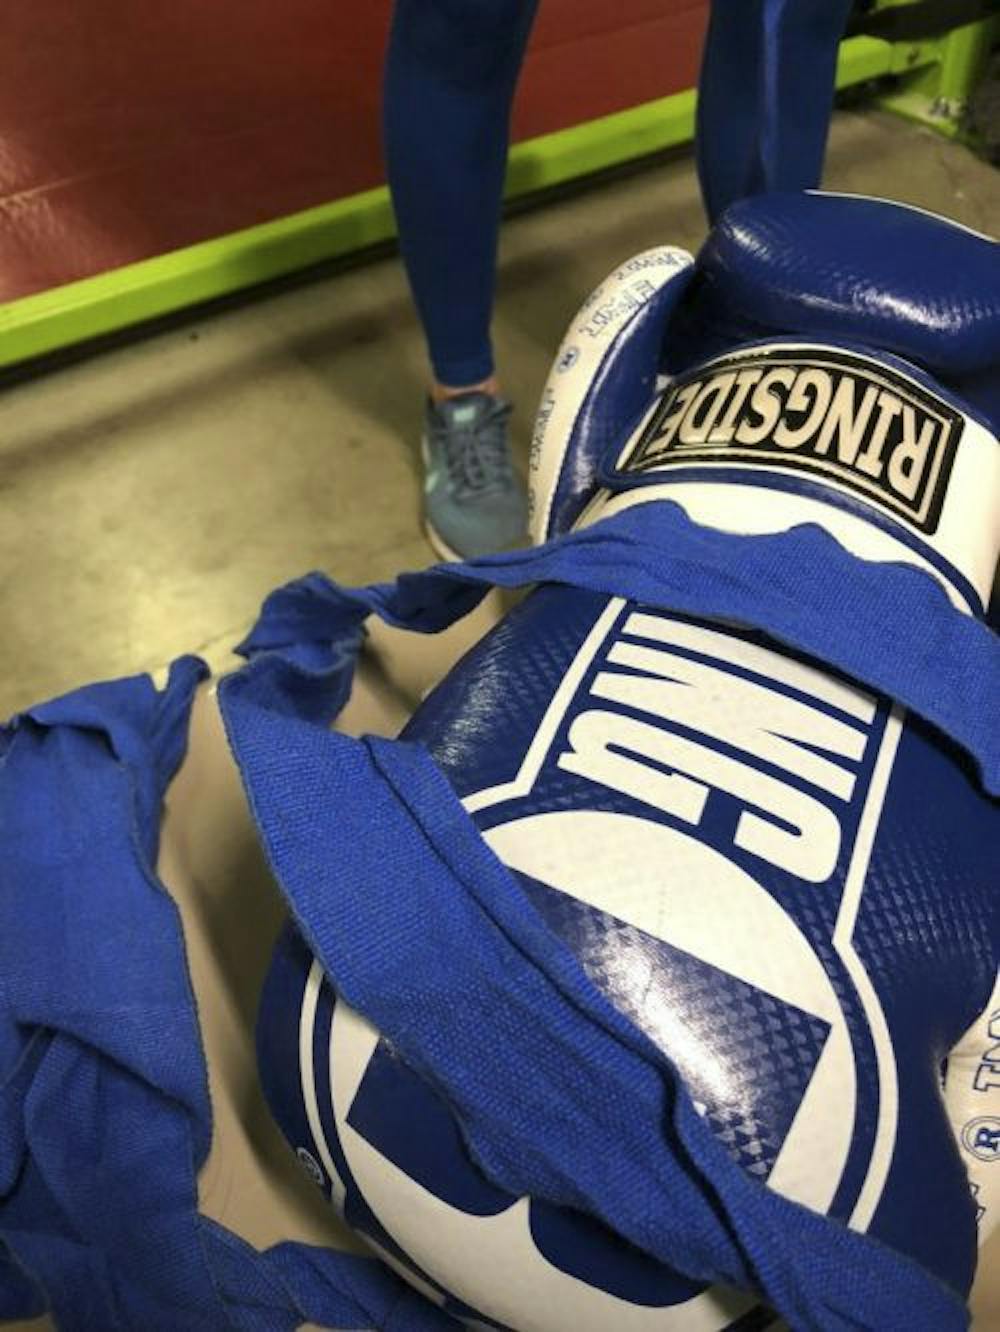 Mihok’s training gloves are set and ready for use.&nbsp;